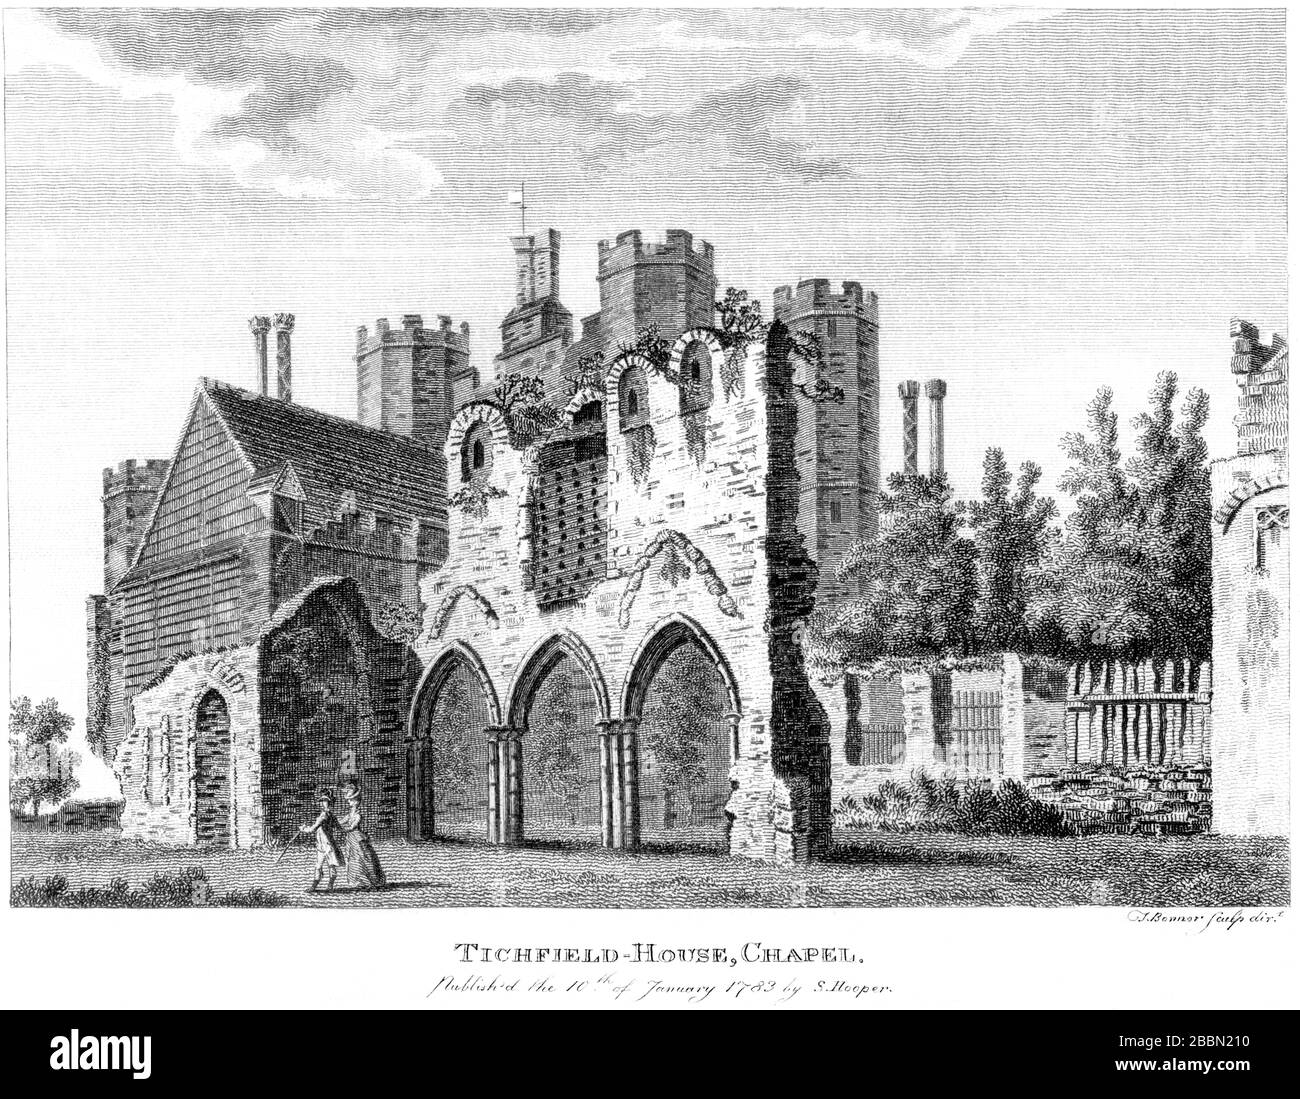 An engraving of Titchfield House (Titchfield Abbey) Chapel 1783 scanned at high resolution from a book published around 1786. Believed copyright free. Stock Photo